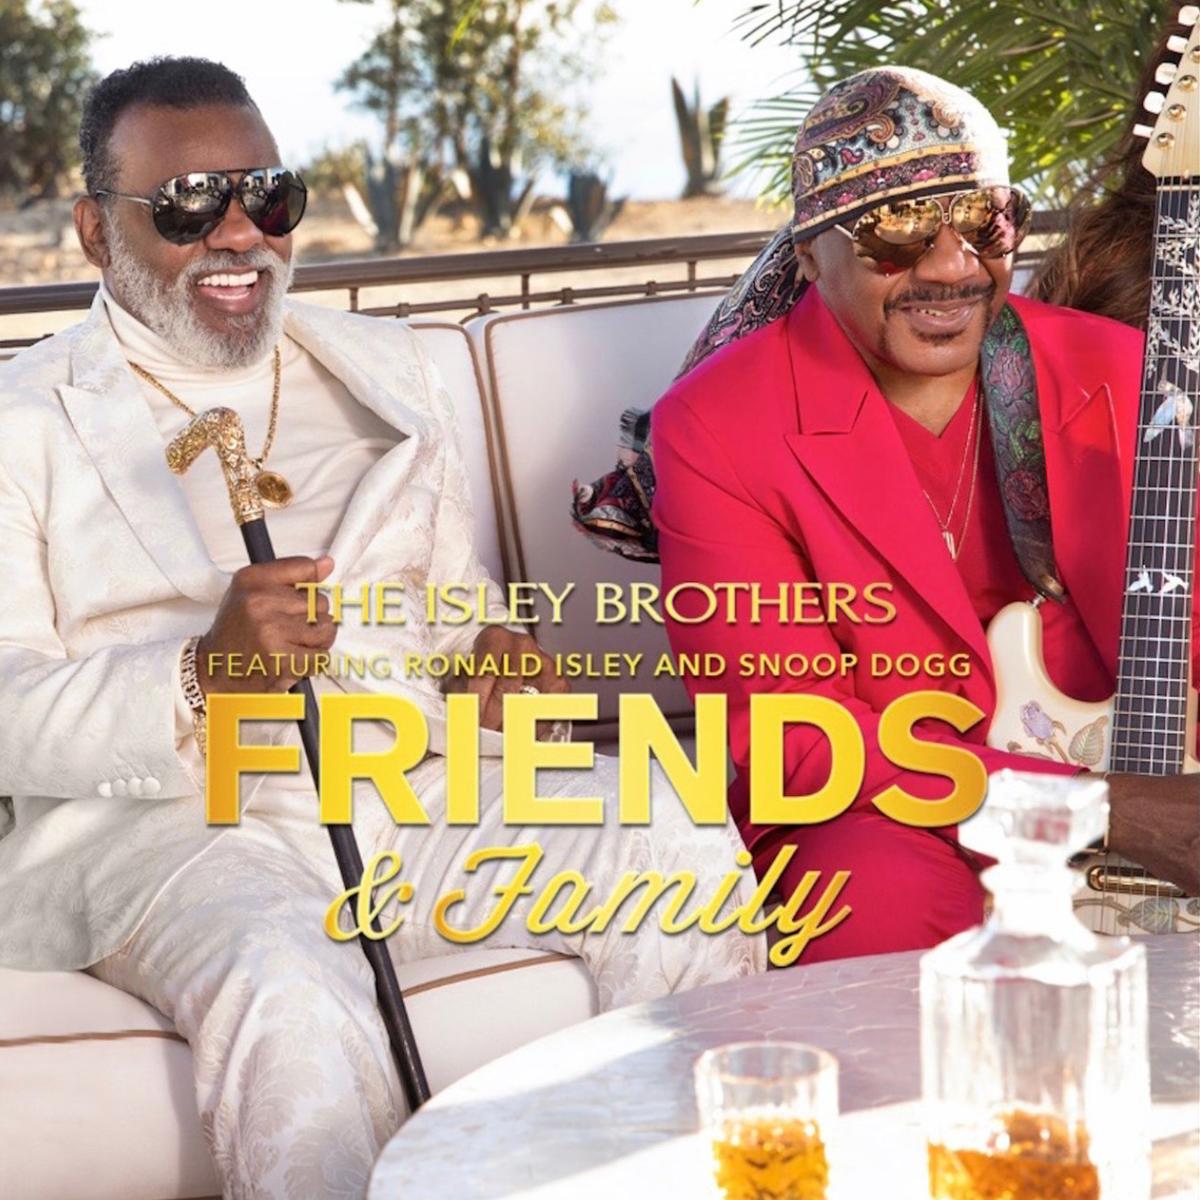 The Isley Brothers Call On Snoop Dogg For “Friends And Family”